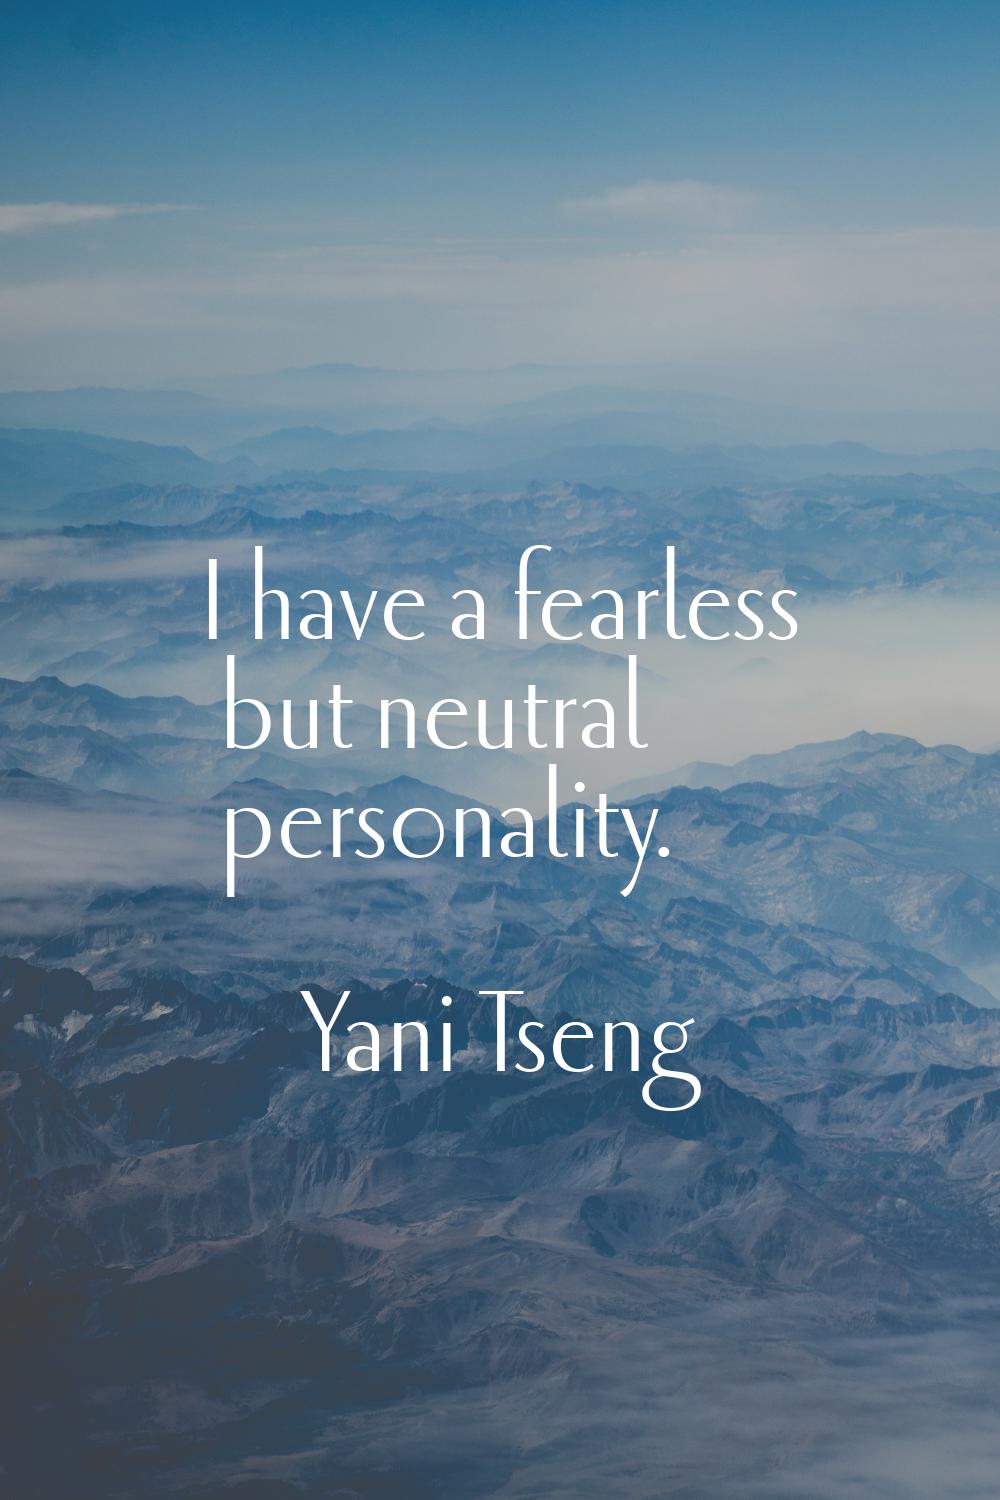 I have a fearless but neutral personality.